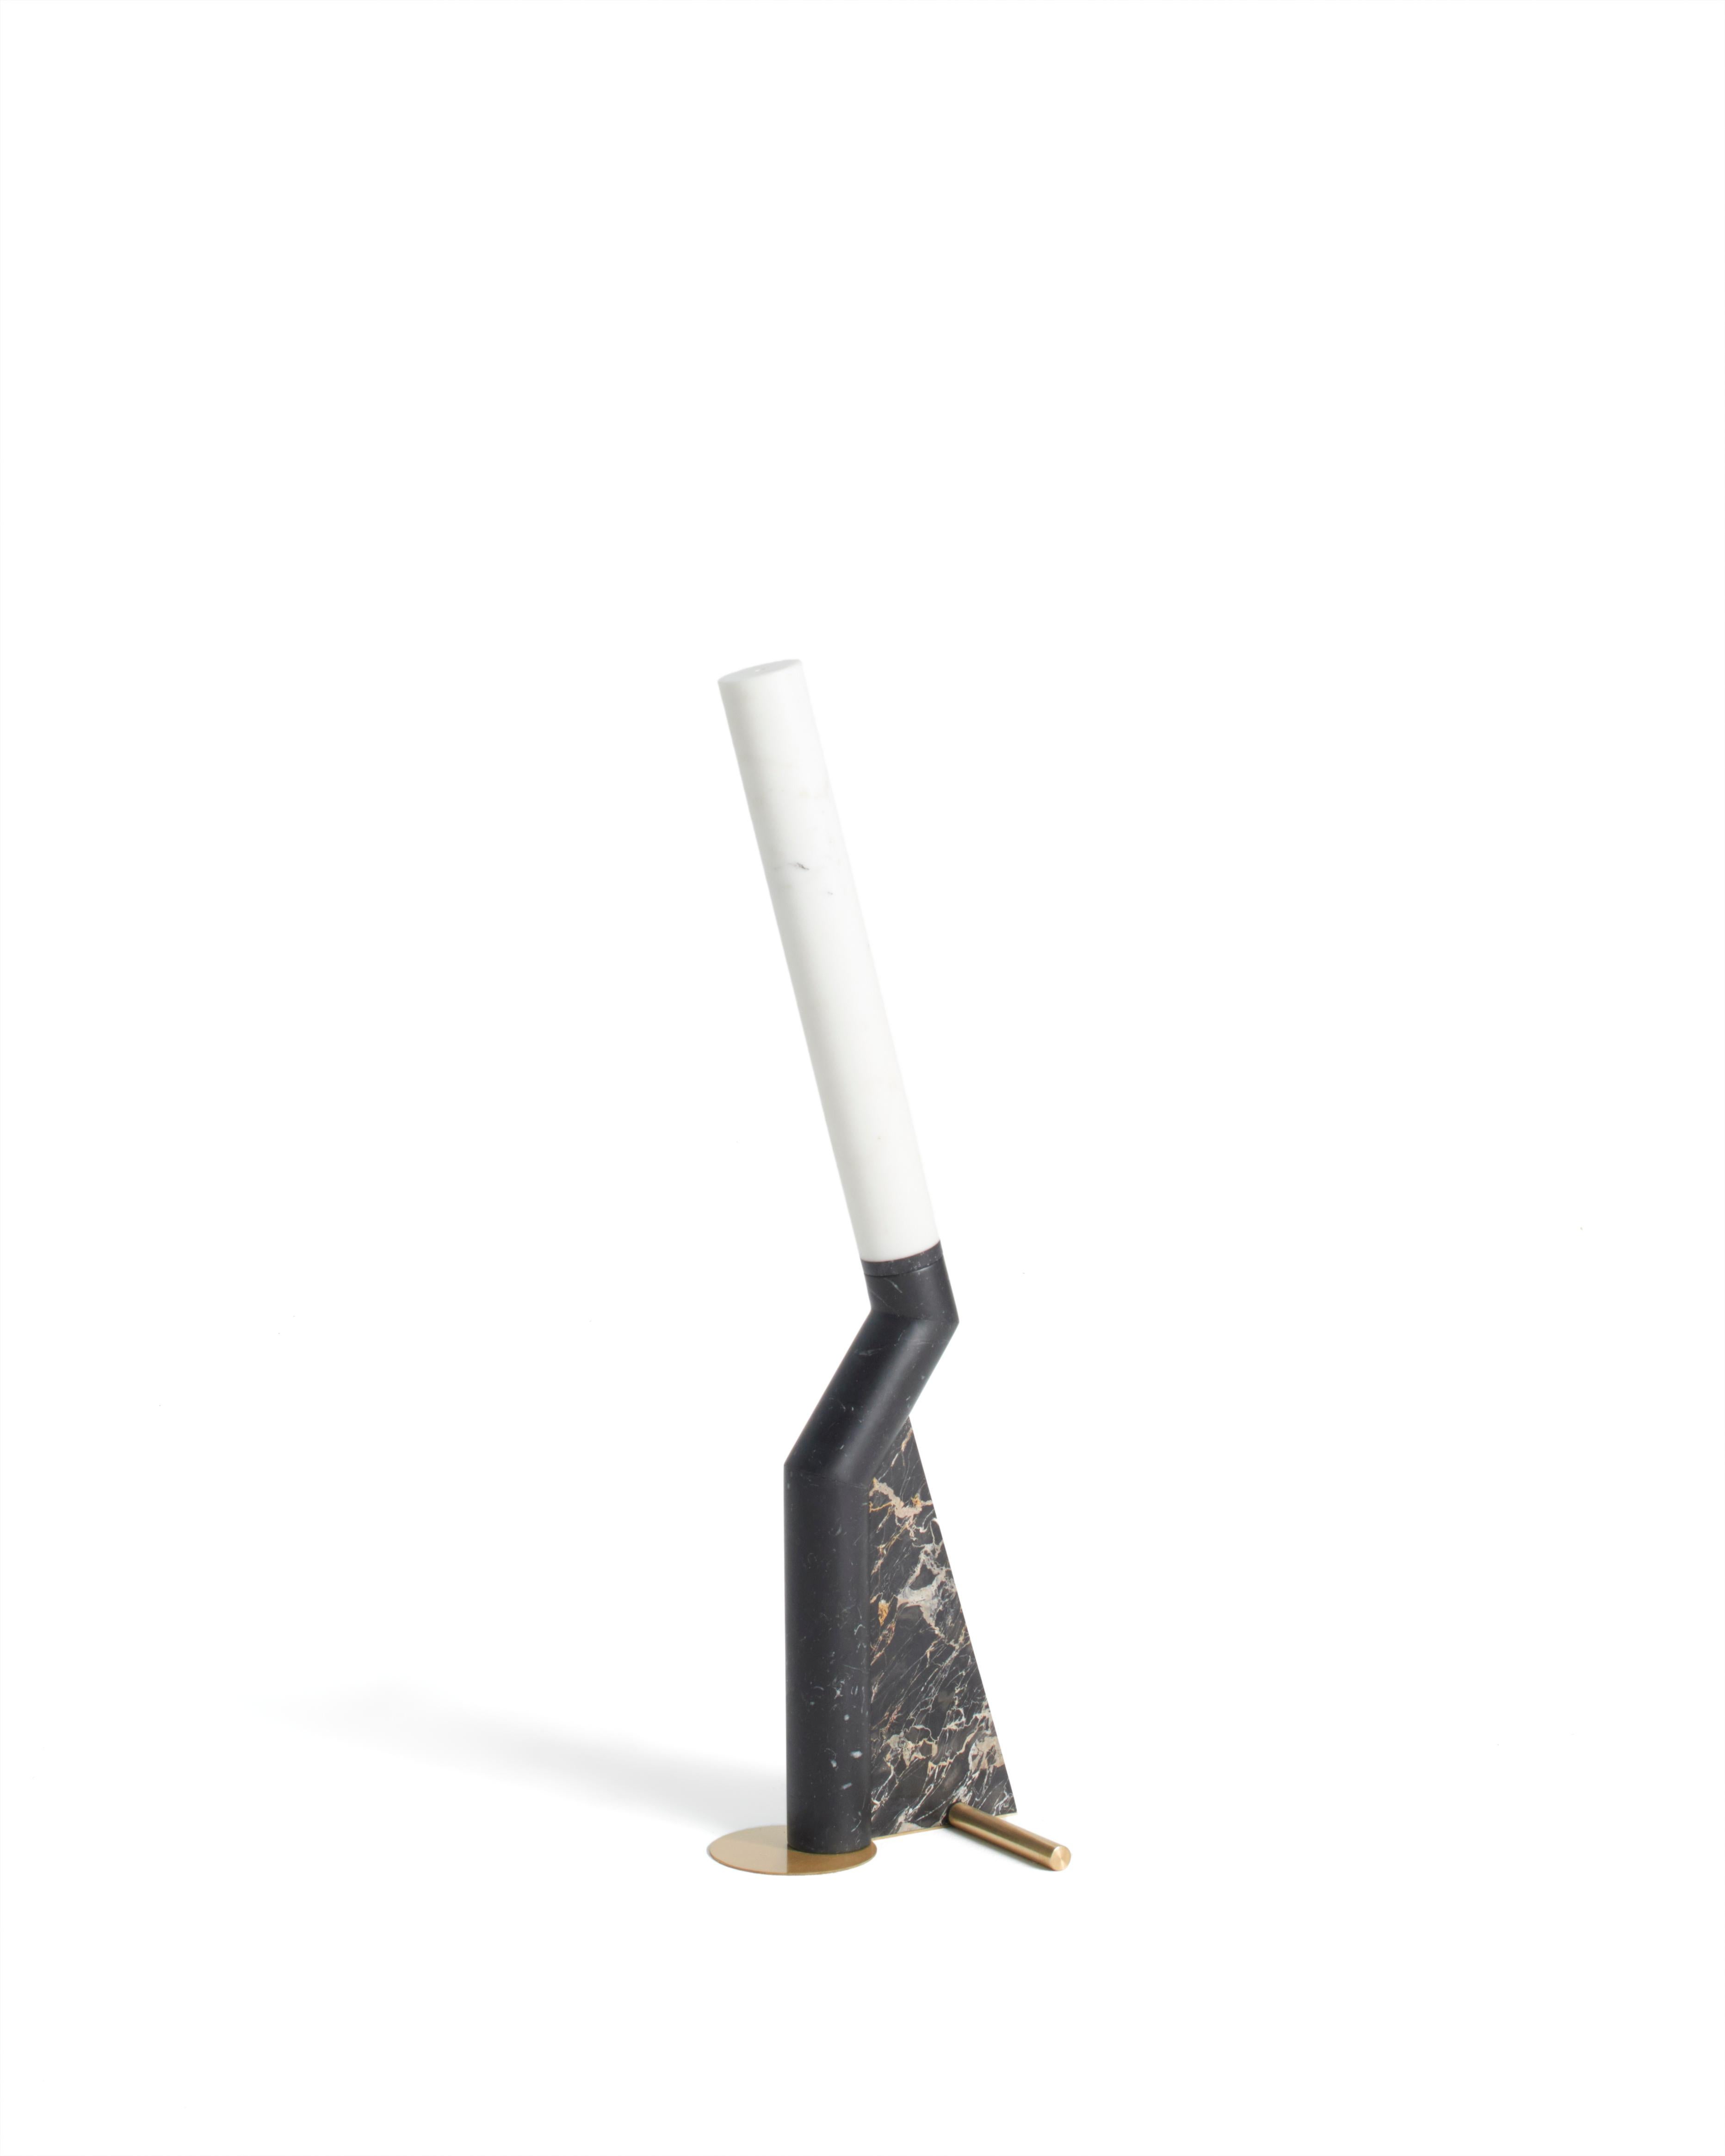 Black Heron table lamp by Bec Brittain
Dimensions: 18 x 6 x 85 cm
Materials: Marble

For her, design is a true kind of love: Bec Brittain studied product design at Parsons School of Design and philosophy at NYU before graduating in architecture